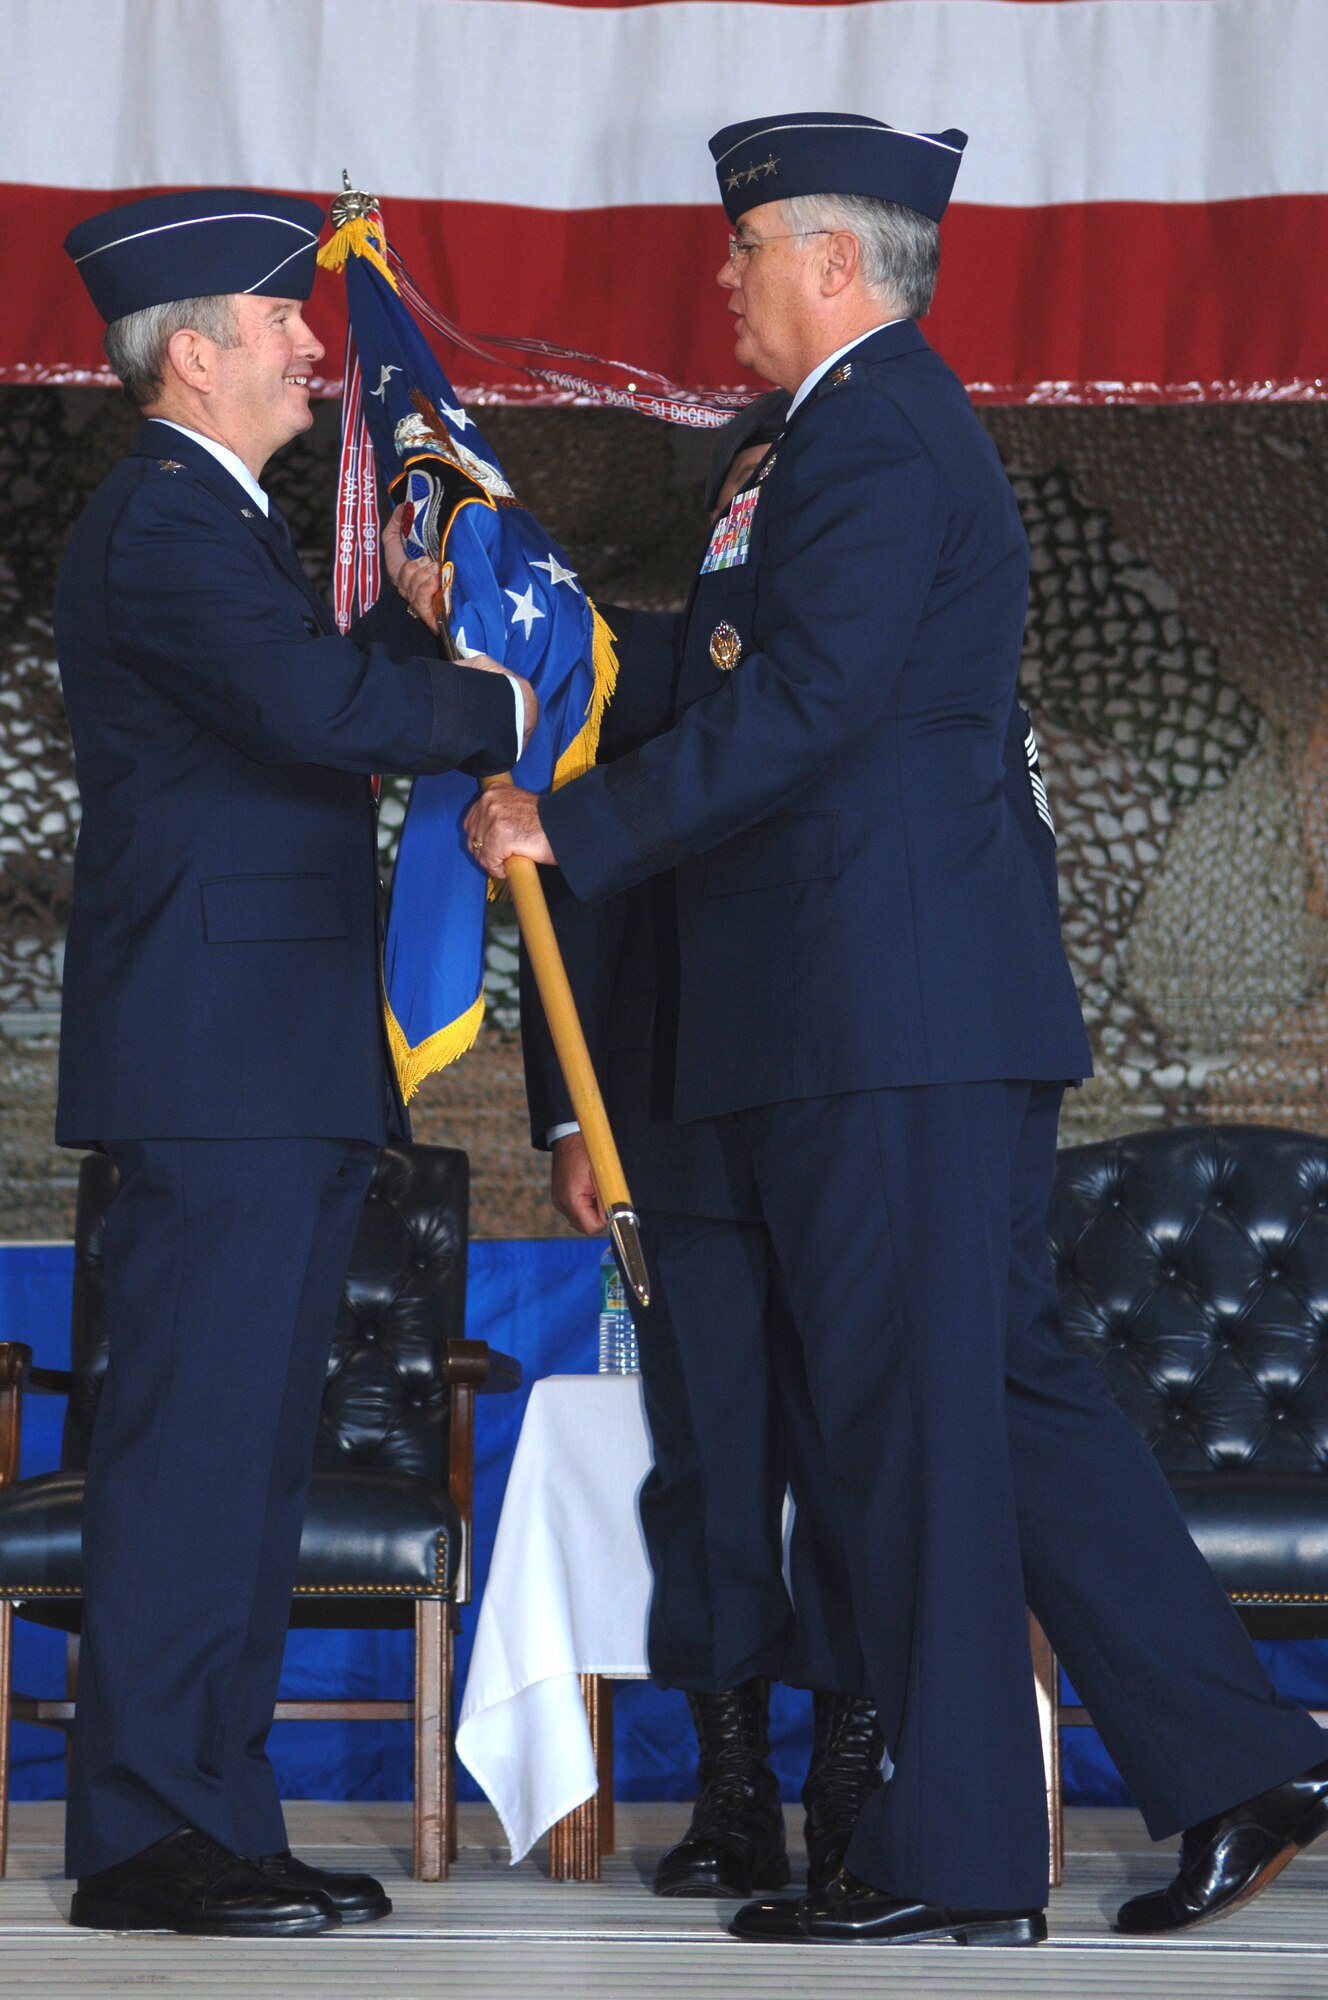 Lt. Gen. Mike Wooley (right), former Air Force Special Operations Command commander, passes the AFSOC guidon to Gen. Duncan McNabb (left) Air Force vice chief of staff, during the AFSOC change of command ceremony Nov. 27 at Hurlburt Field, Fla. By passing the guidon to General McNabb, General Wooley relinquished command of AFSOC to Lt. Gen. Donny Wurster. (U.S. Air Force Photo/Senior Airman Ali Flisek)